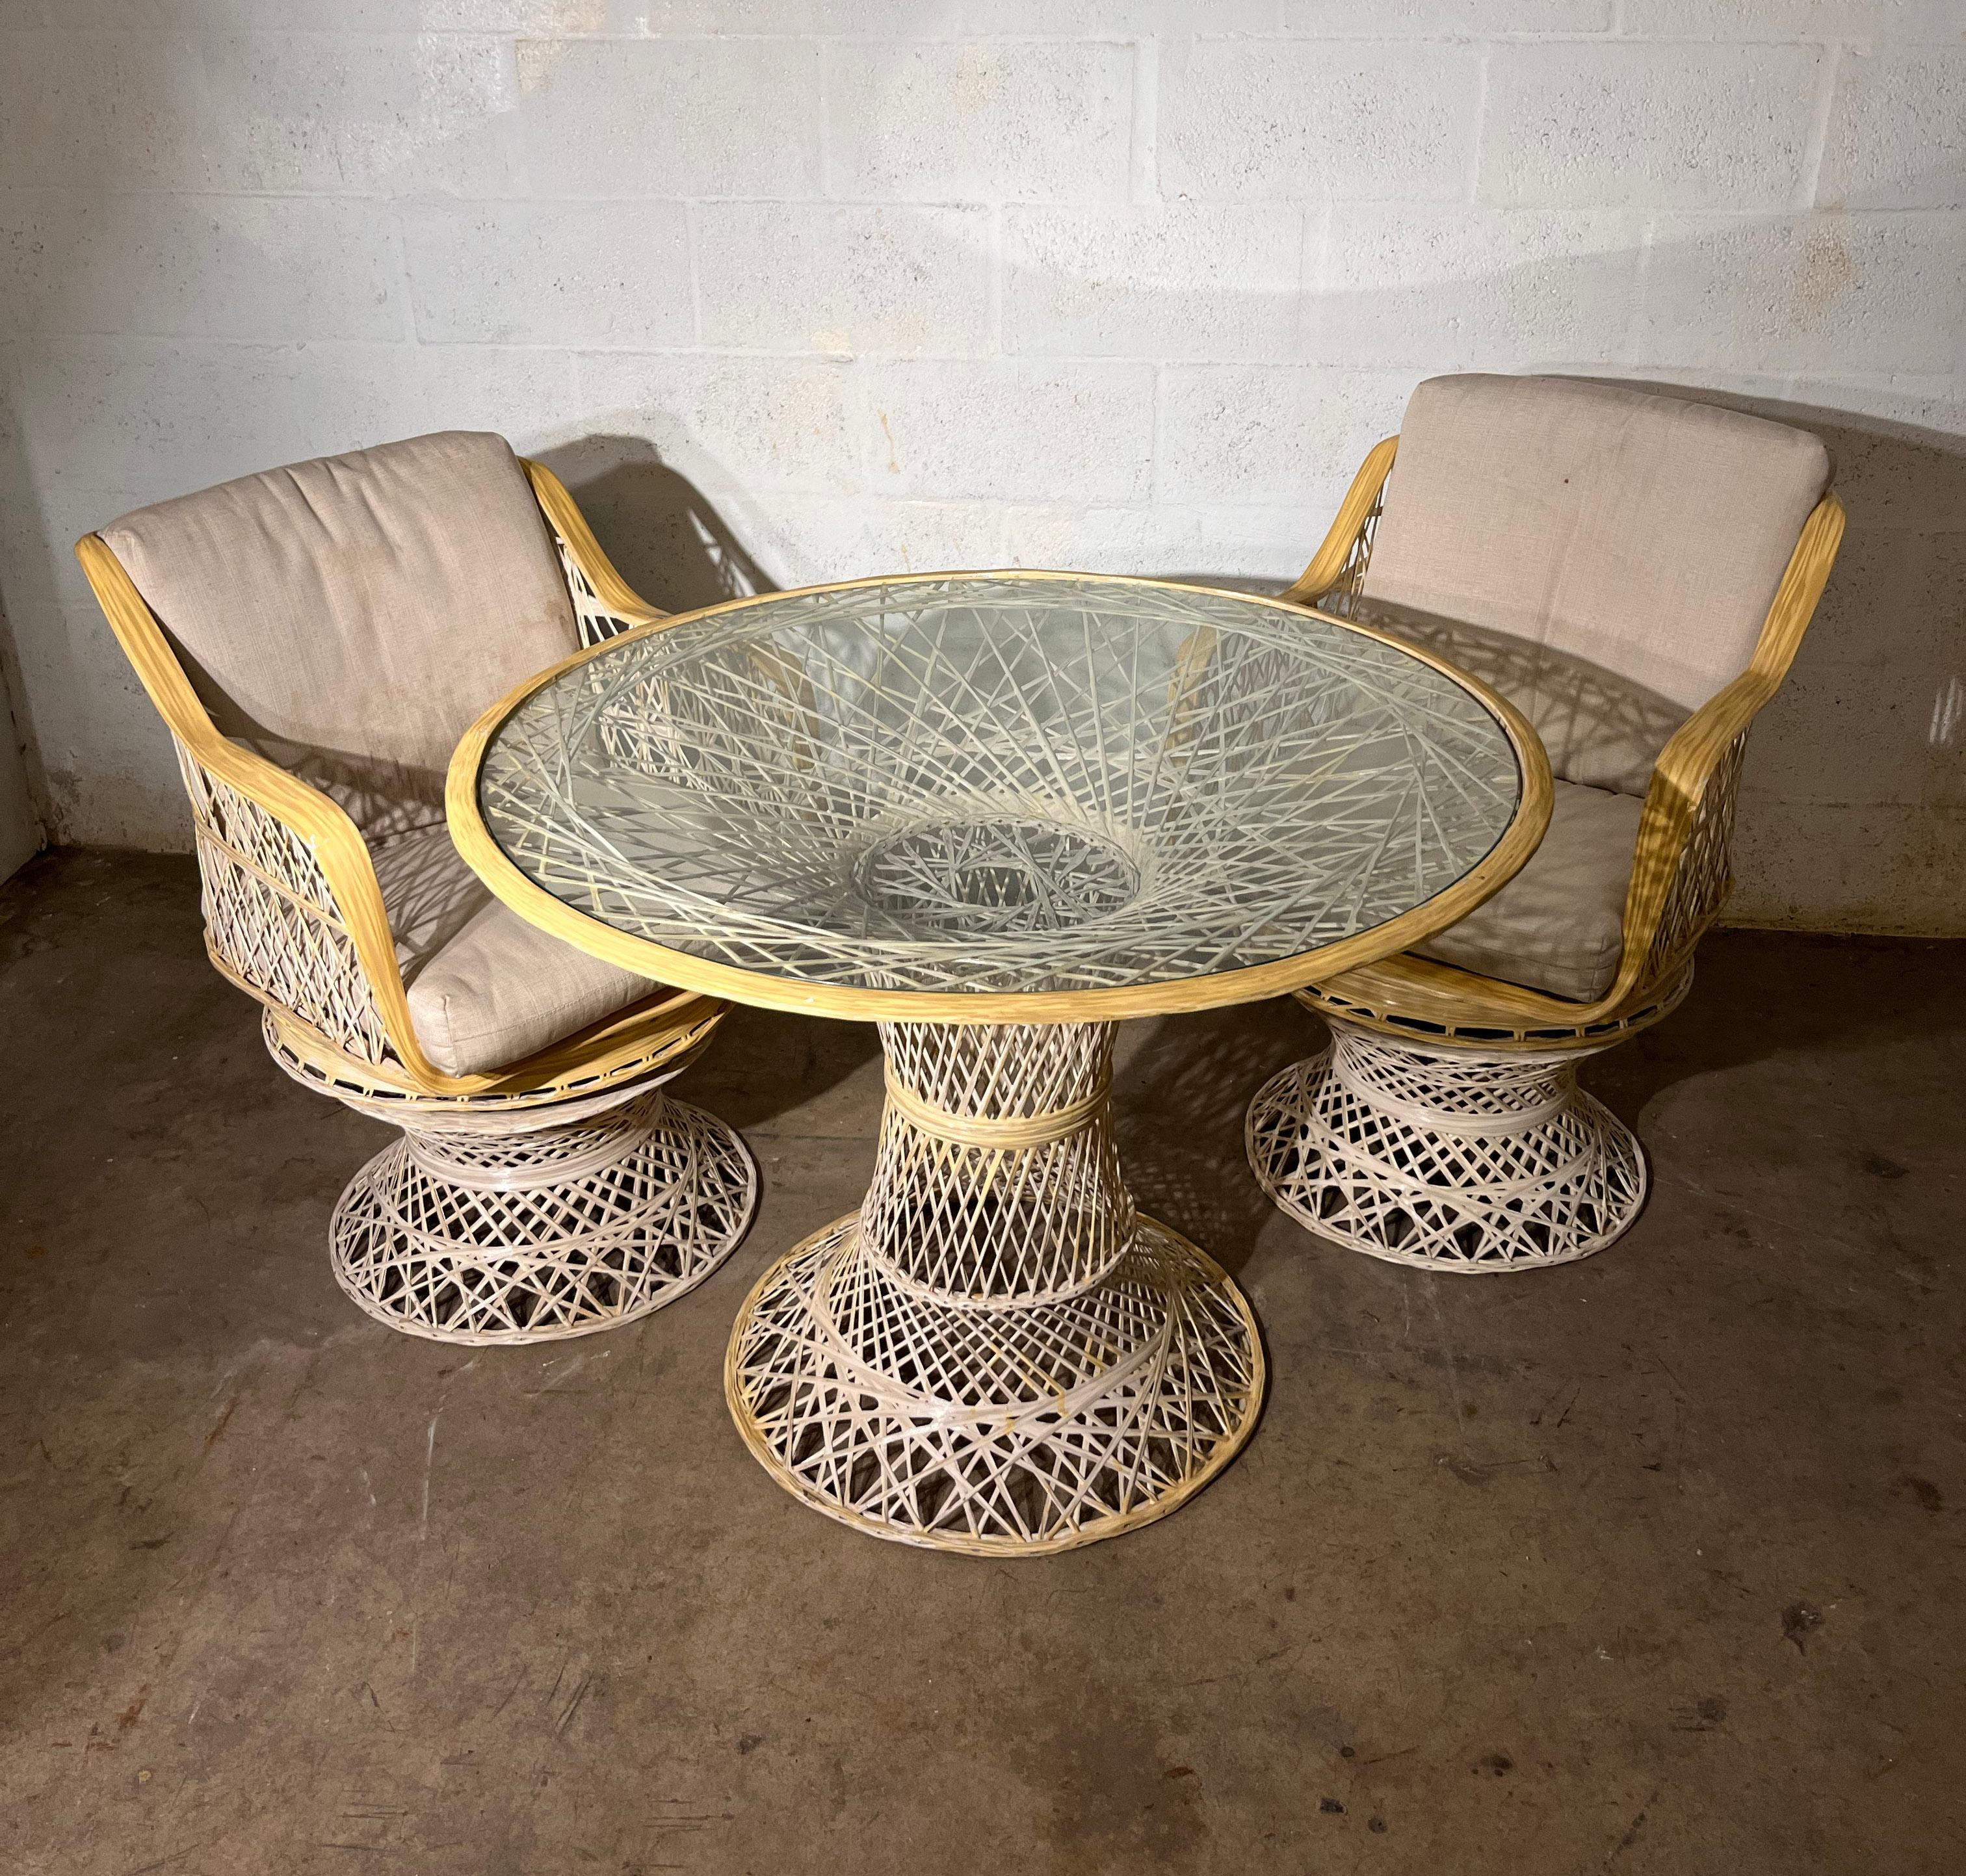 Russel Woodard was an American designer renowned for his mid-century modern outdoor furniture. Founder of his eponymous company in 1946, Woodard's iconic designs, characterized by clean lines and meticulous craftsmanship. His innovative